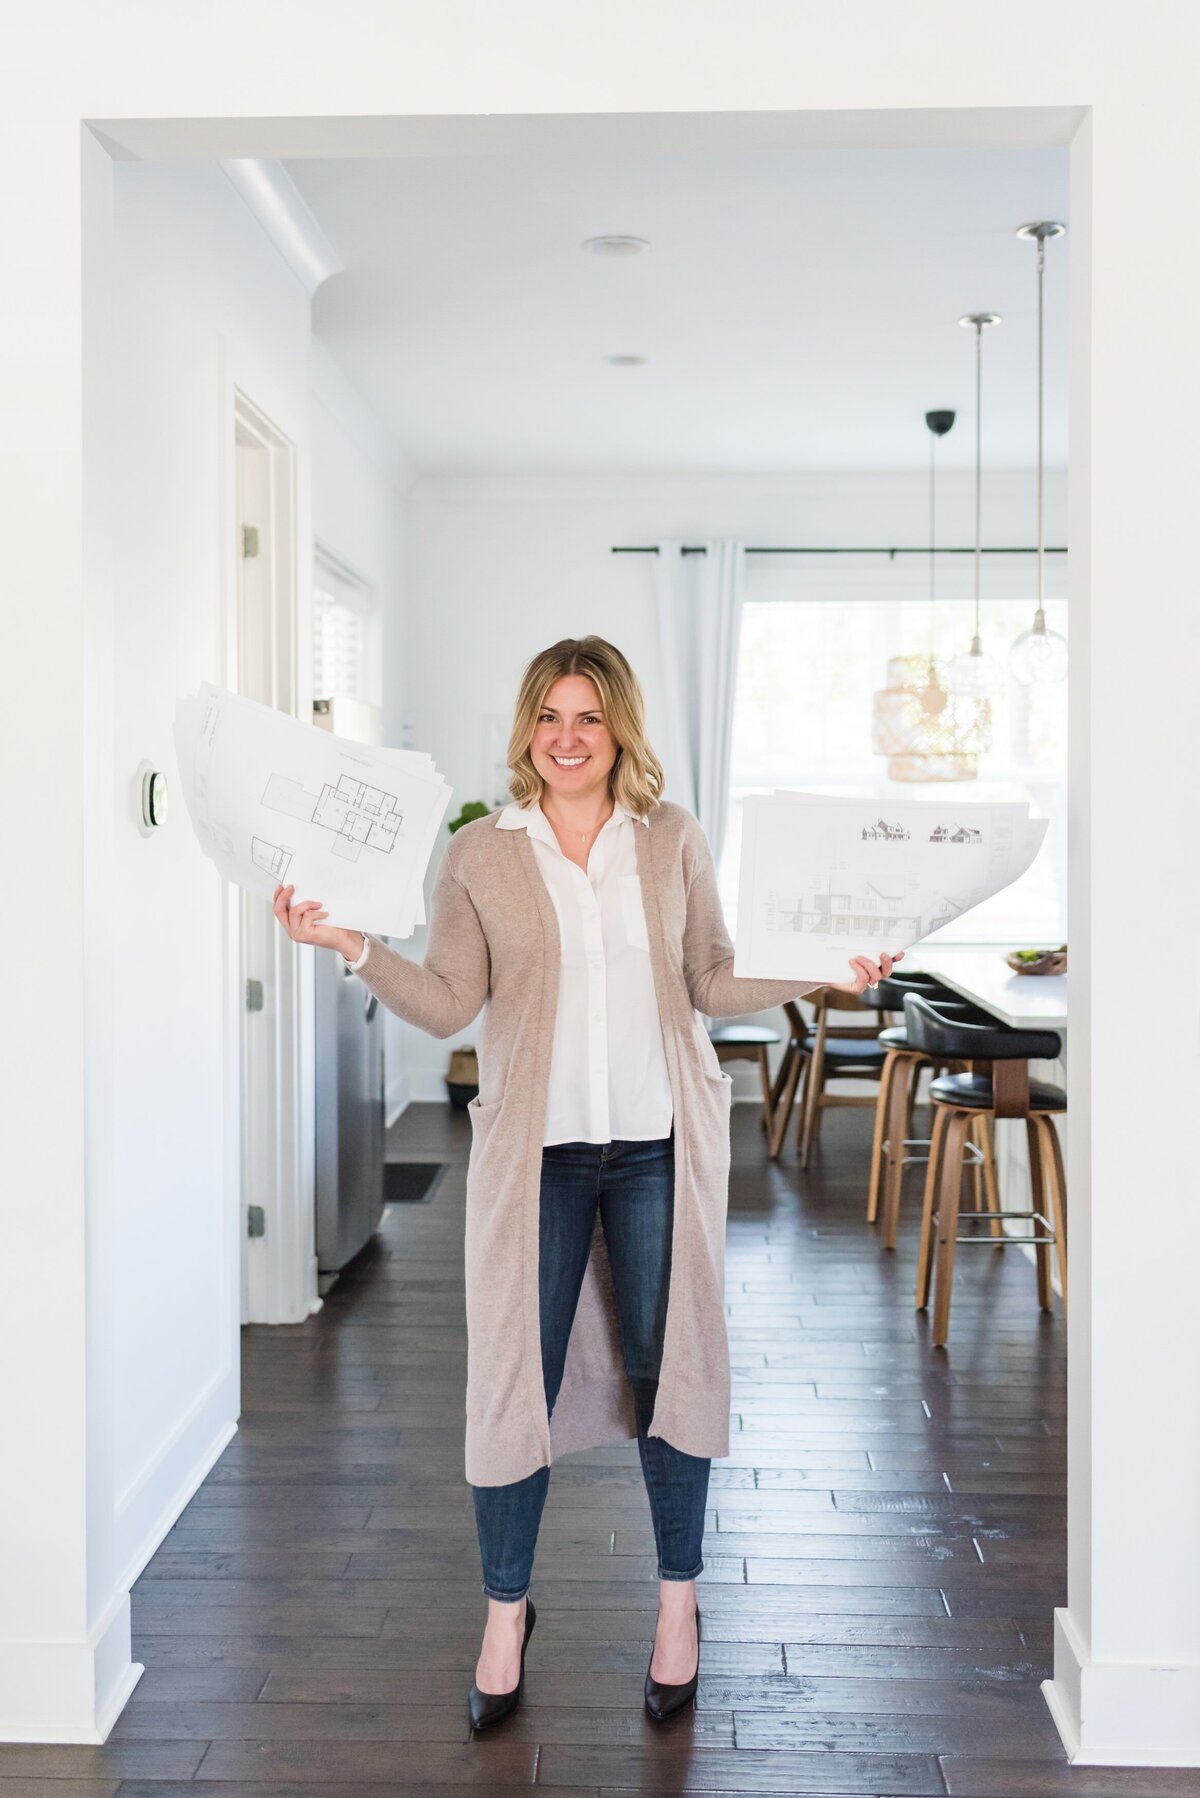 Nashville realtor and architect standing in doorframe with building plans in her hands for a headshot